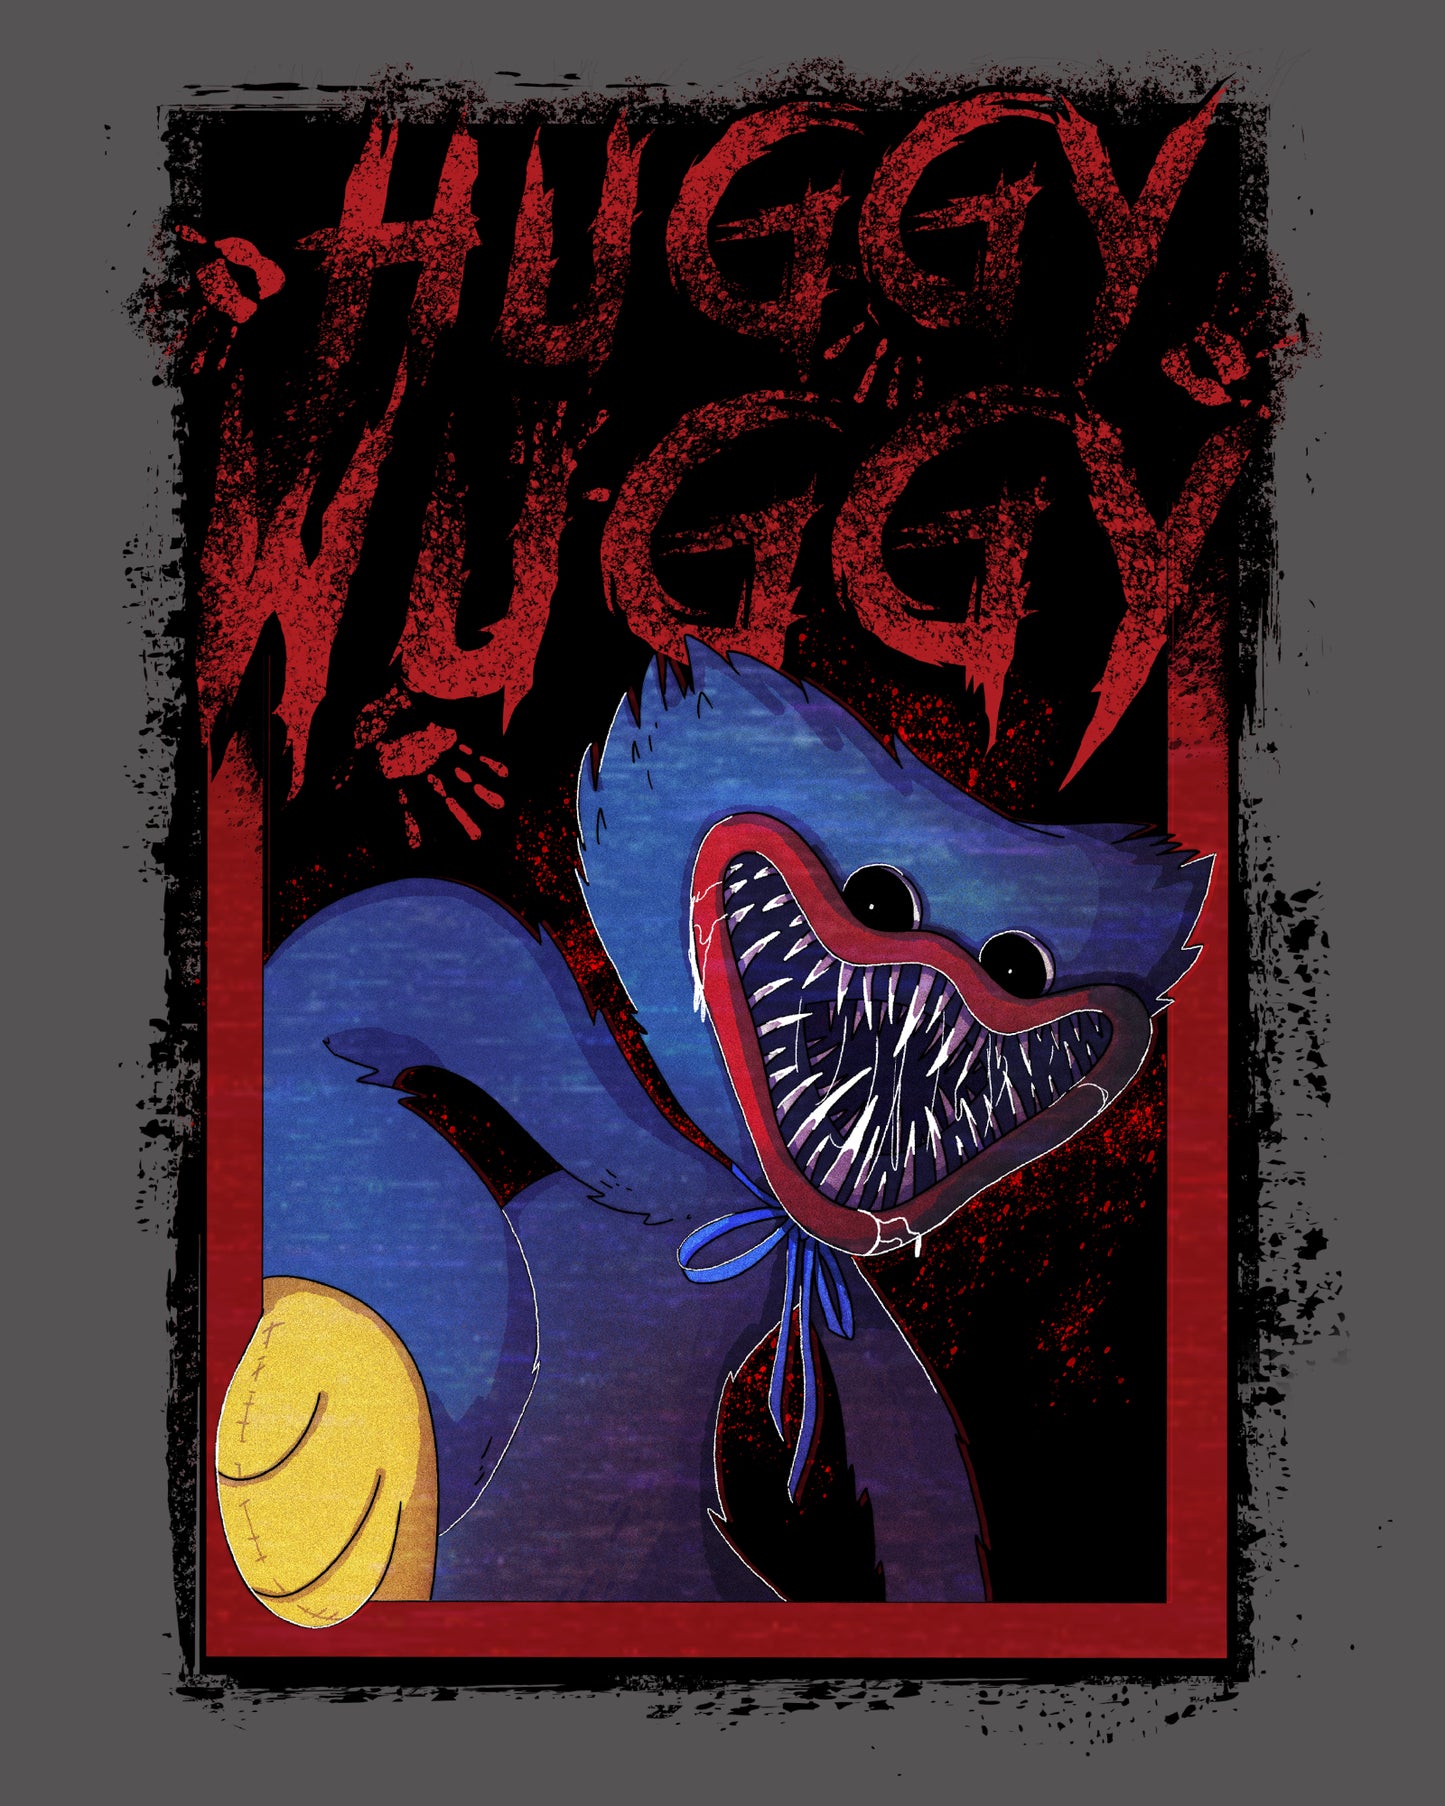 image on shirt: huggy wuggy crawling out to attack. text: huggy wuggy